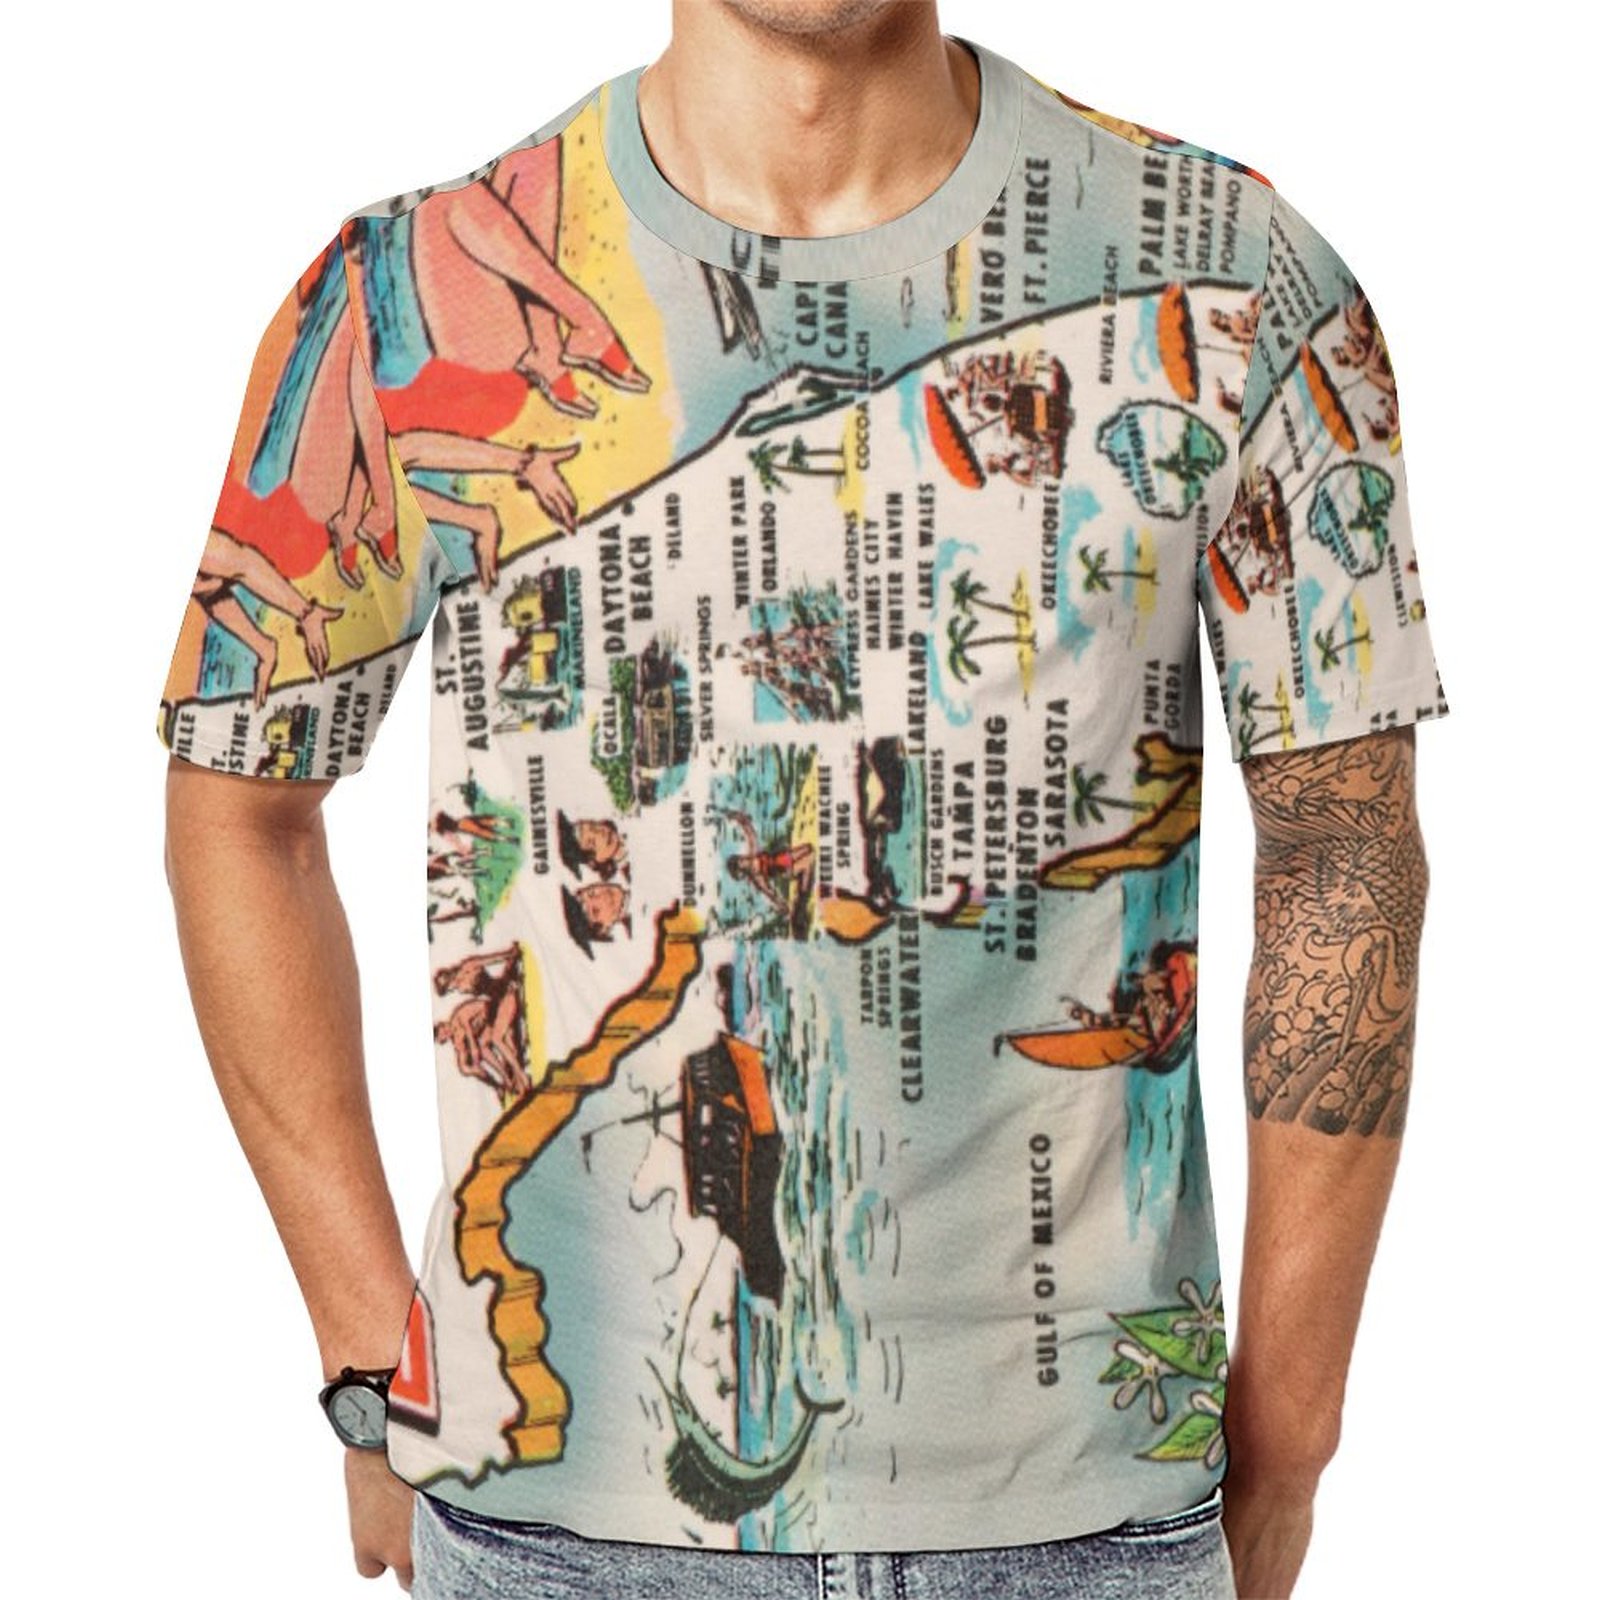 Vintage Florida Map Kitschy Greetings Short Sleeve Print Unisex Tshirt Summer Casual Tees for Men and Women Coolcoshirts